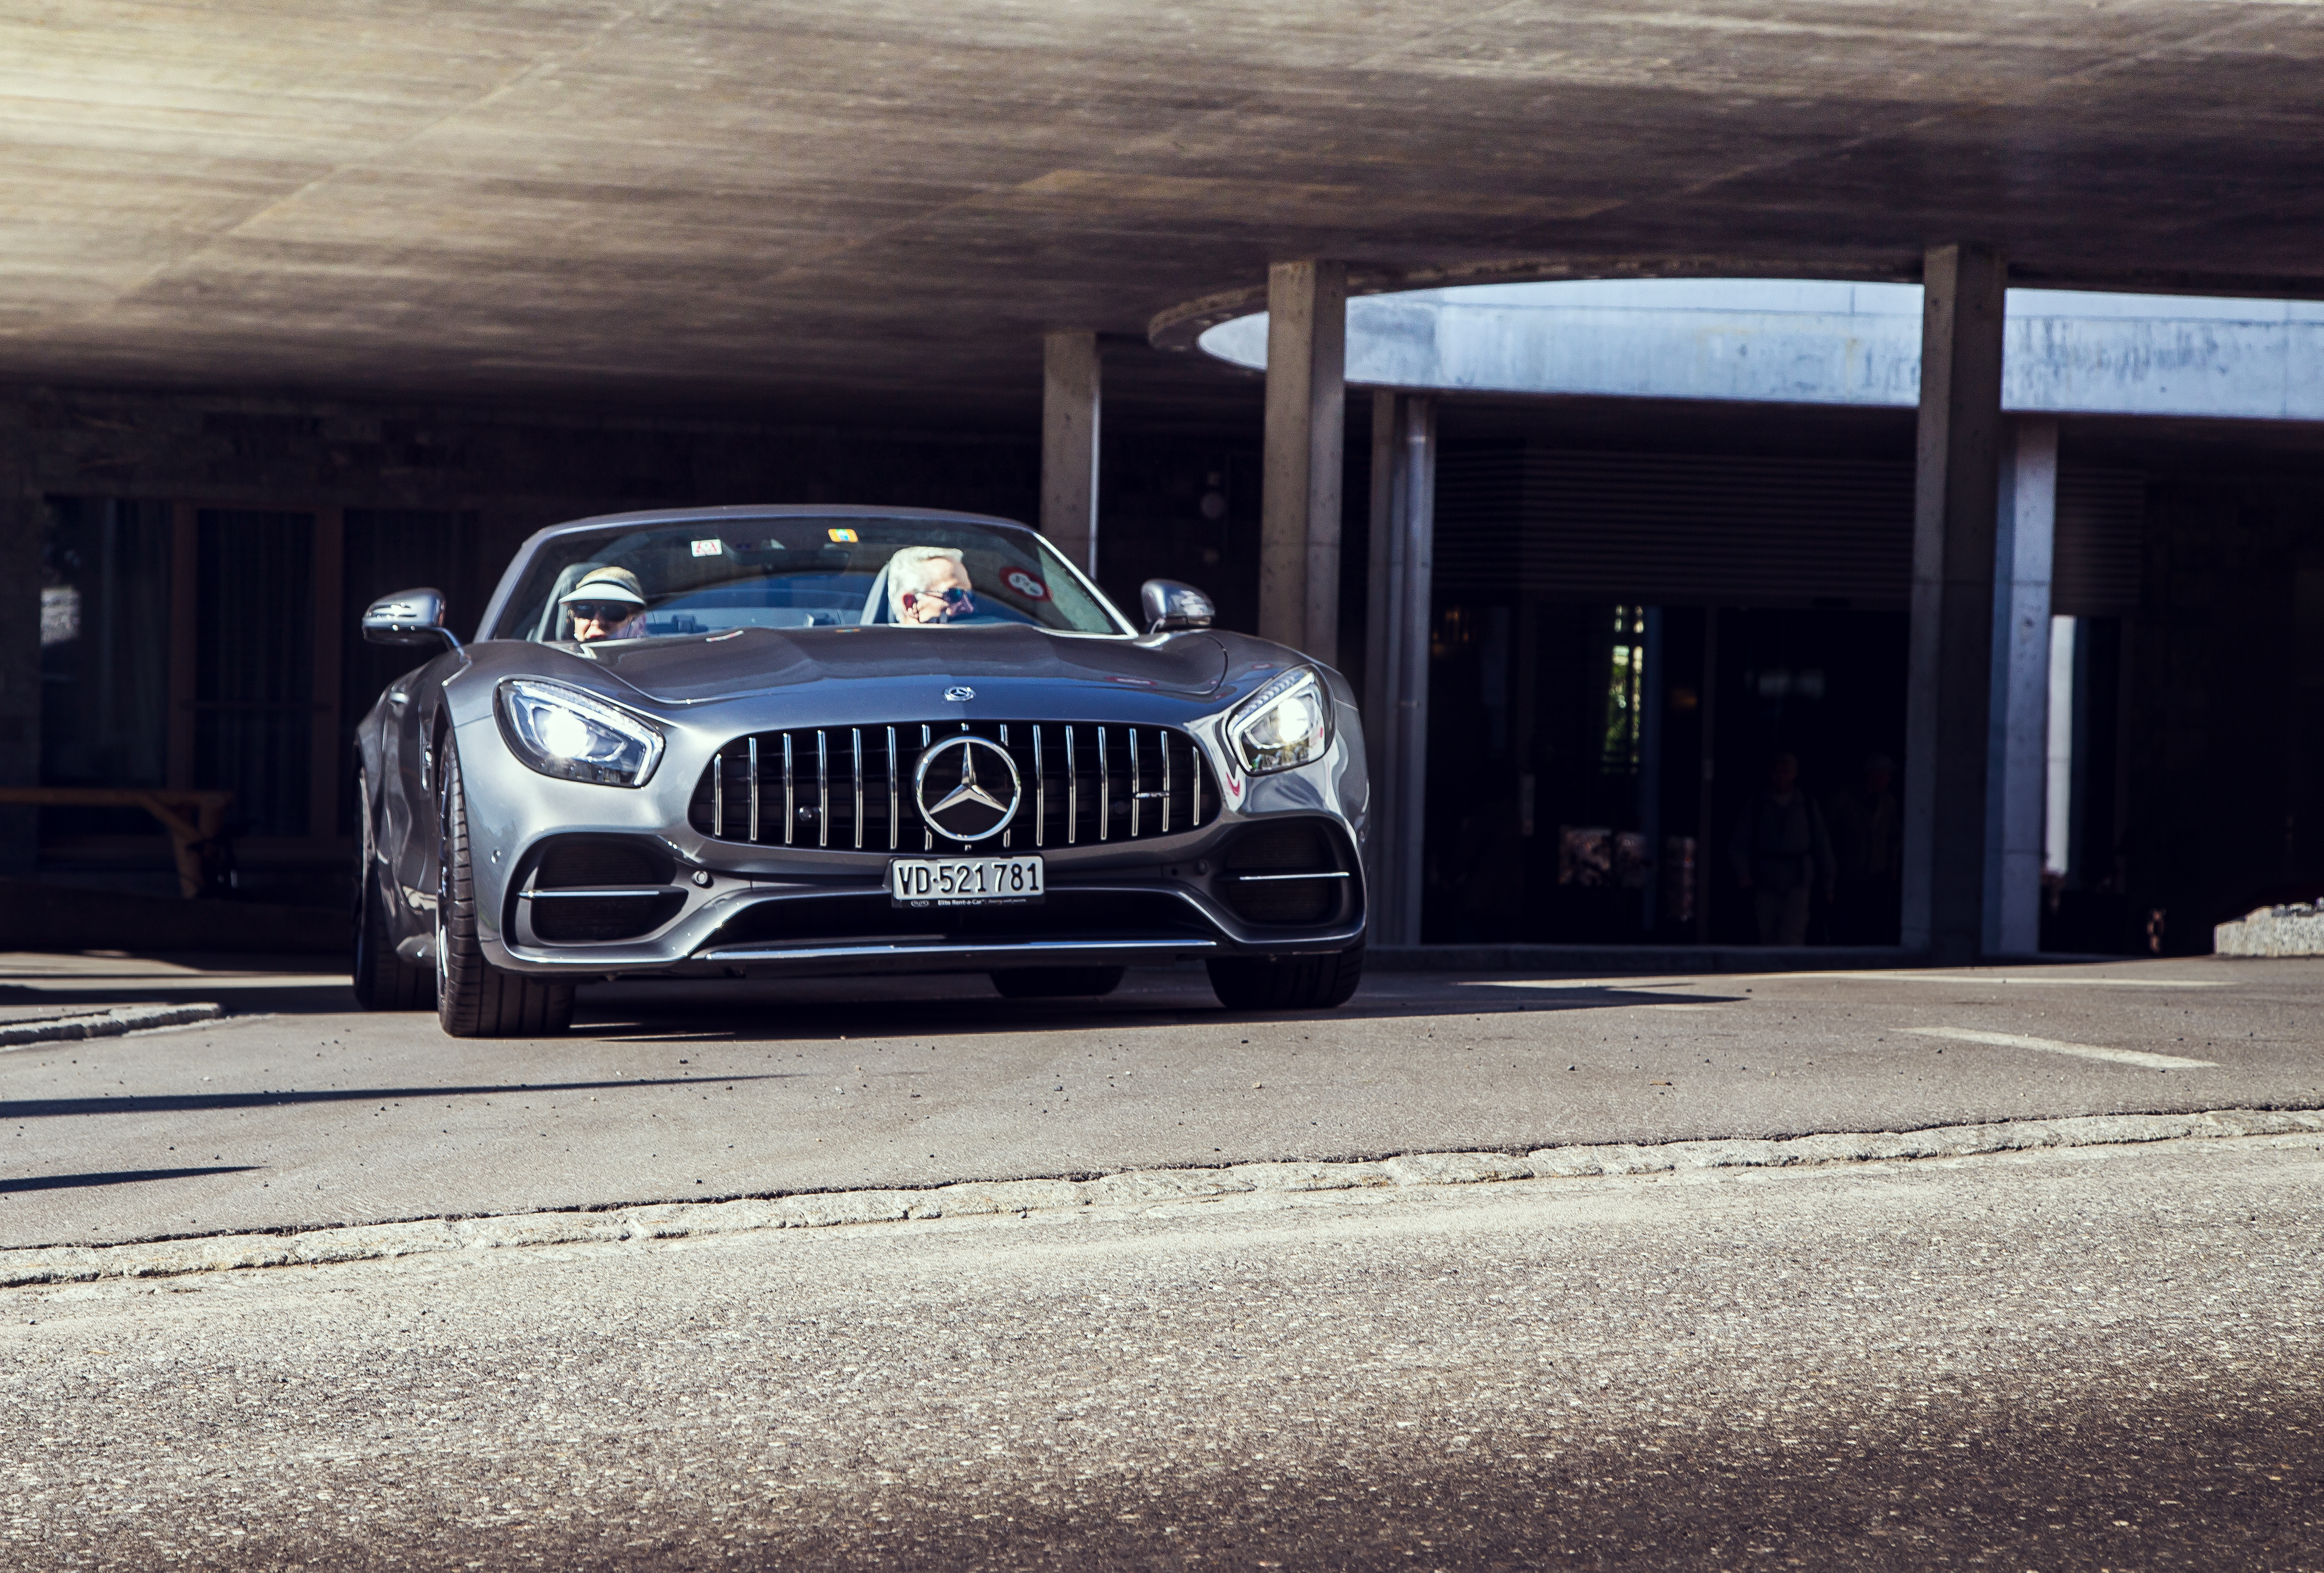 Supercar Experiences in the Alps - AMG Hotel delivery